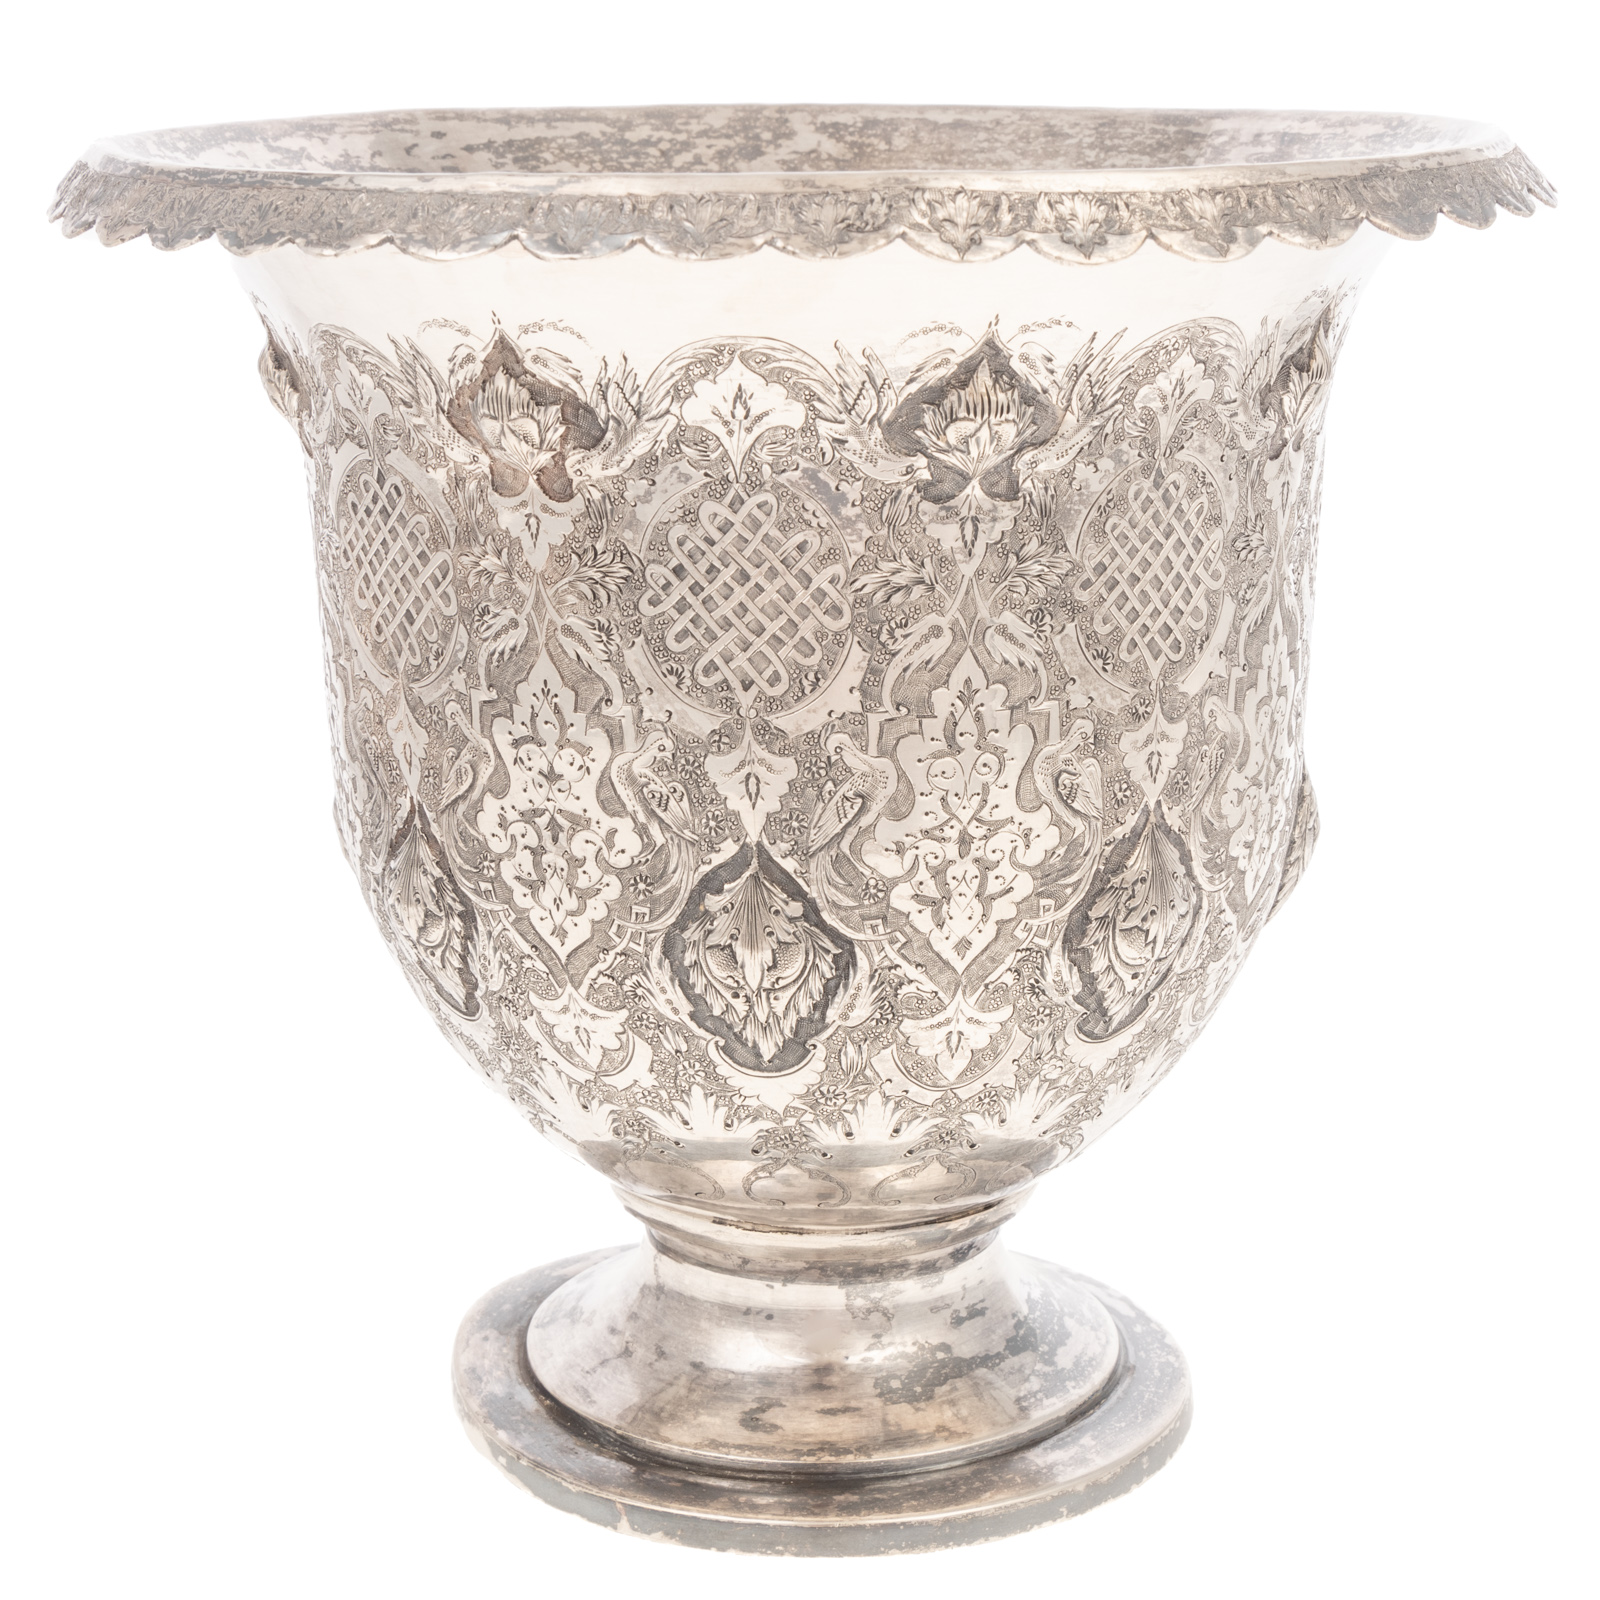 PERSIAN SILVER URN Early to mid 2e9ffd